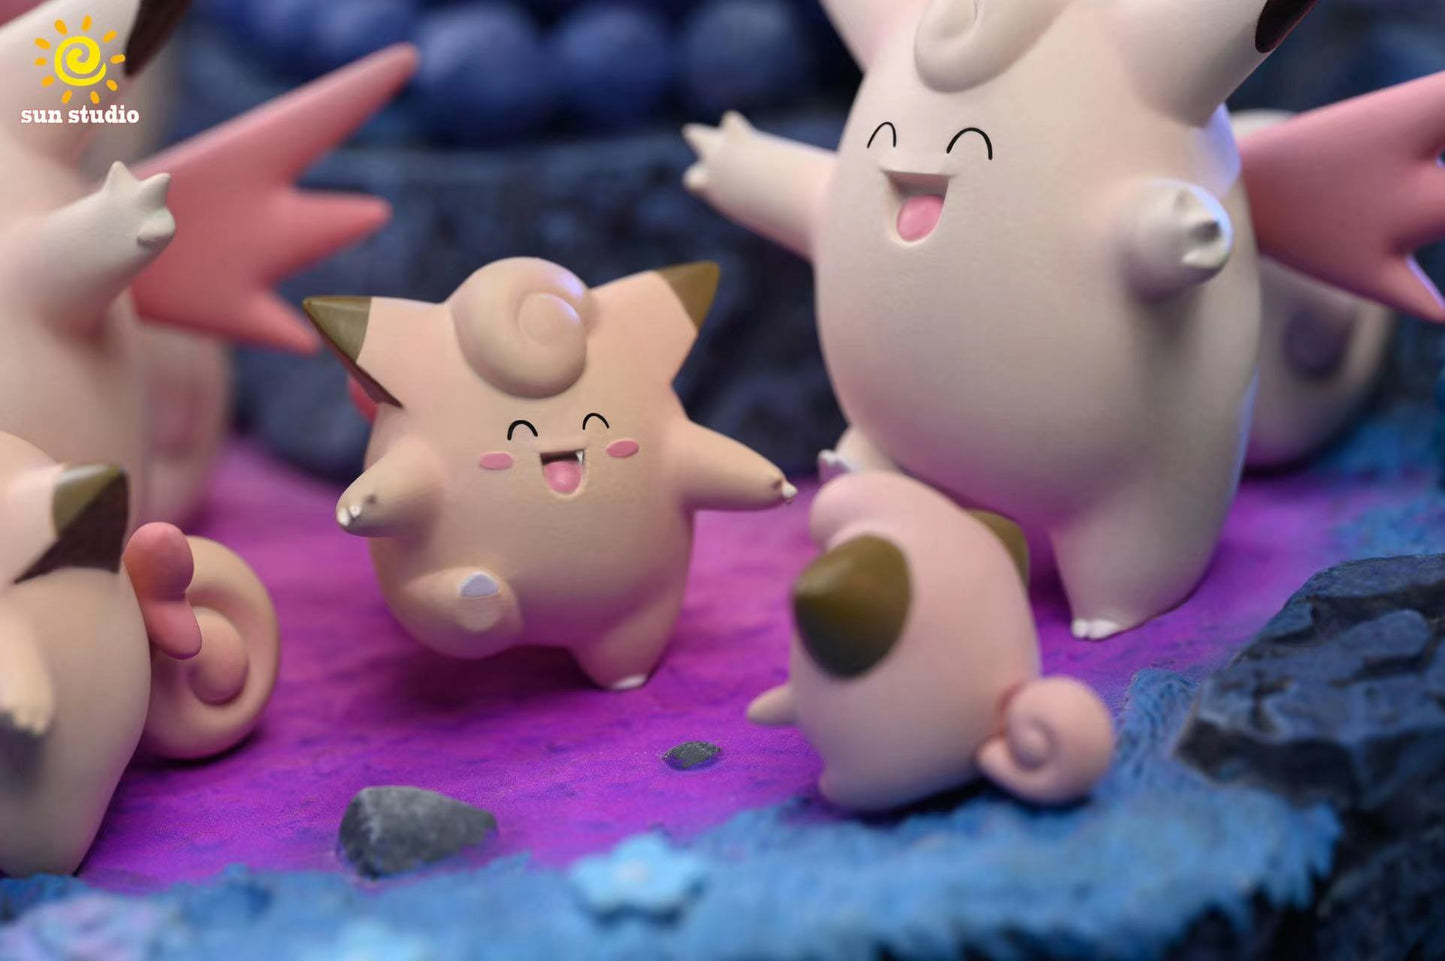 [PREORDER CLOSED] 1/20 Scale World Figure [SUN] - Clefairy & Clefable at Mt. Moonview